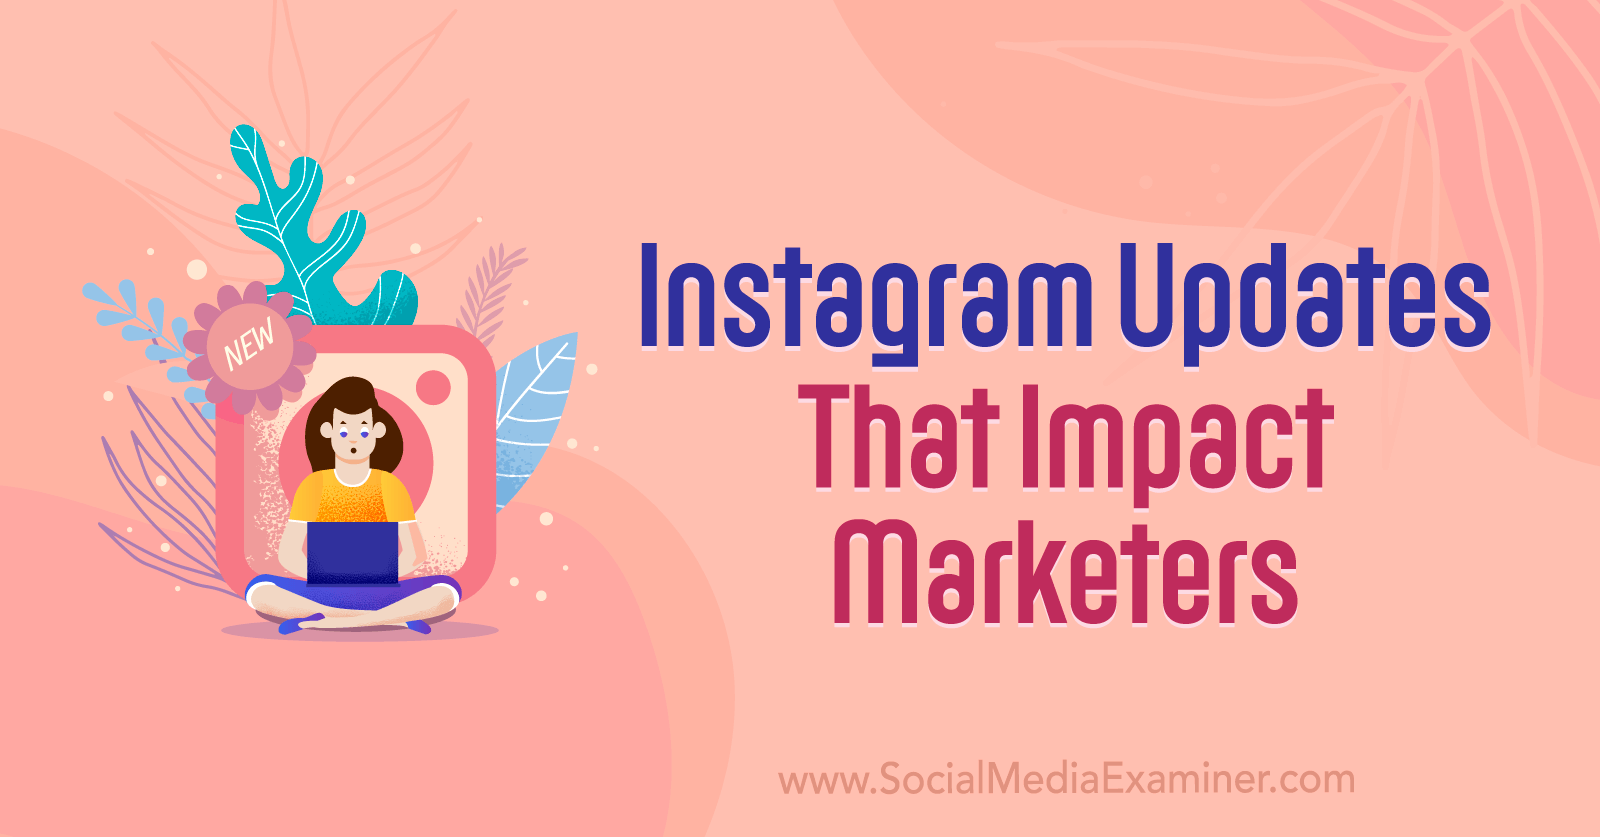 Instagram Updates That Impact Marketers by Social Media Examiner